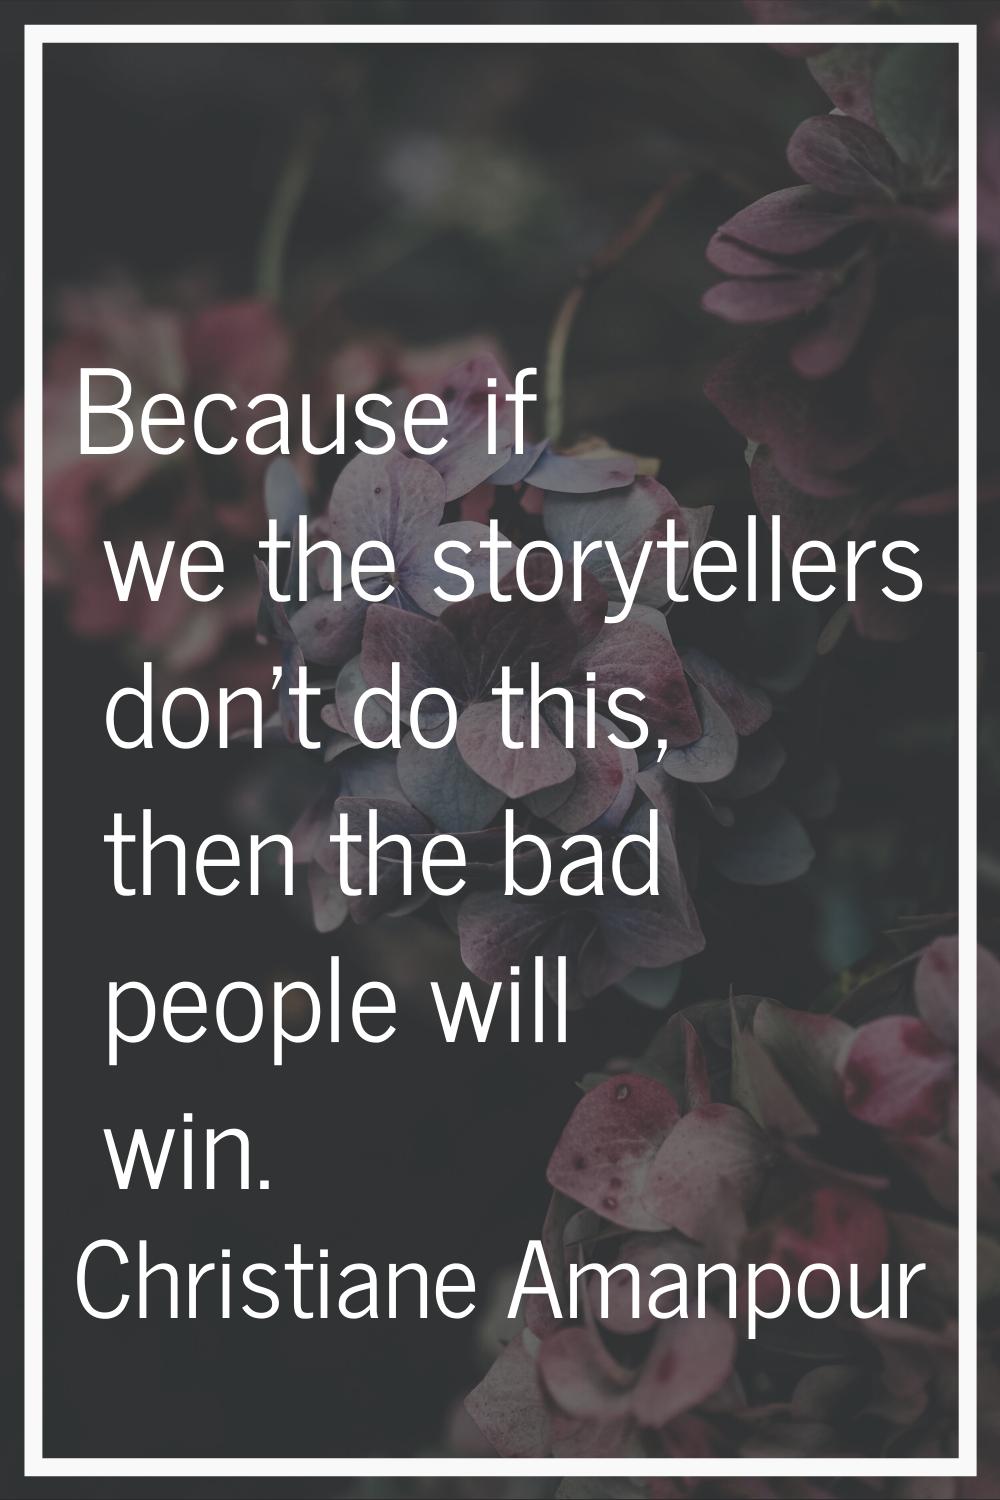 Because if we the storytellers don't do this, then the bad people will win.